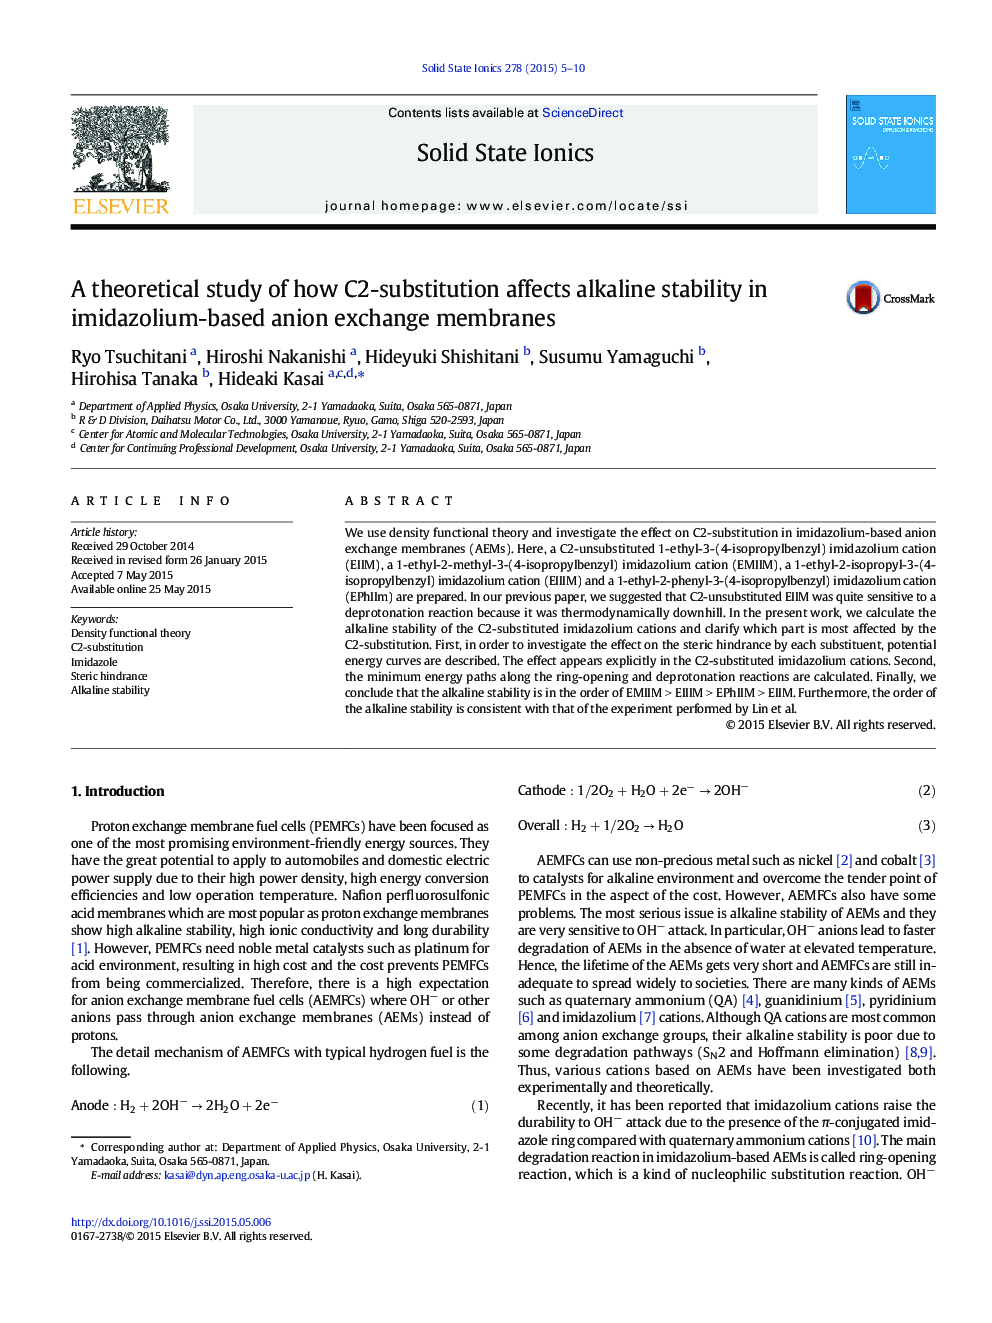 A theoretical study of how C2-substitution affects alkaline stability in imidazolium-based anion exchange membranes